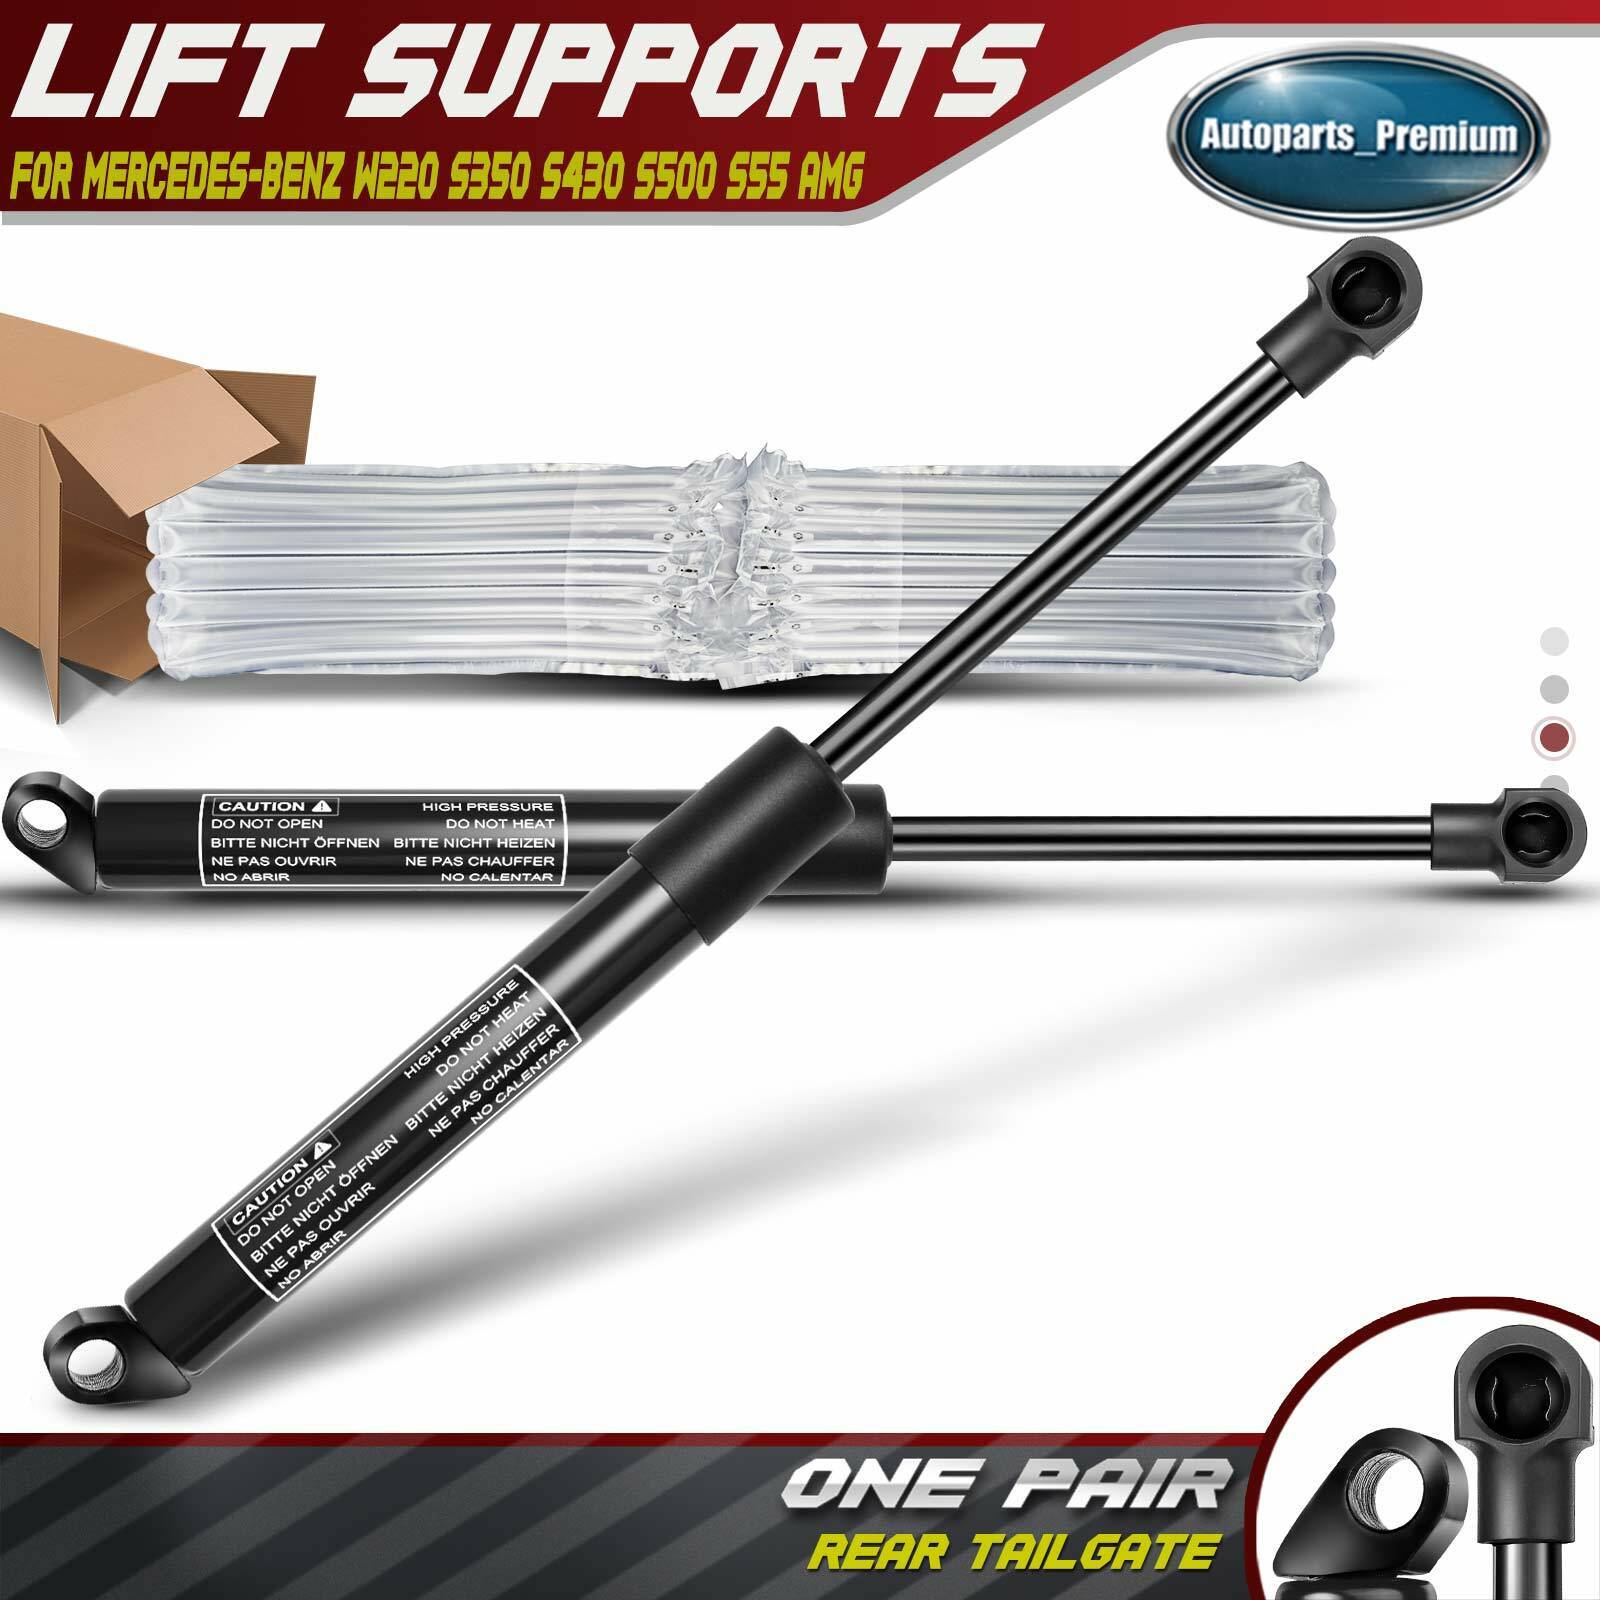 2x Trunk Tailgate Lift Supports Shocks for Mercedes Benz W220 S350 2207500136